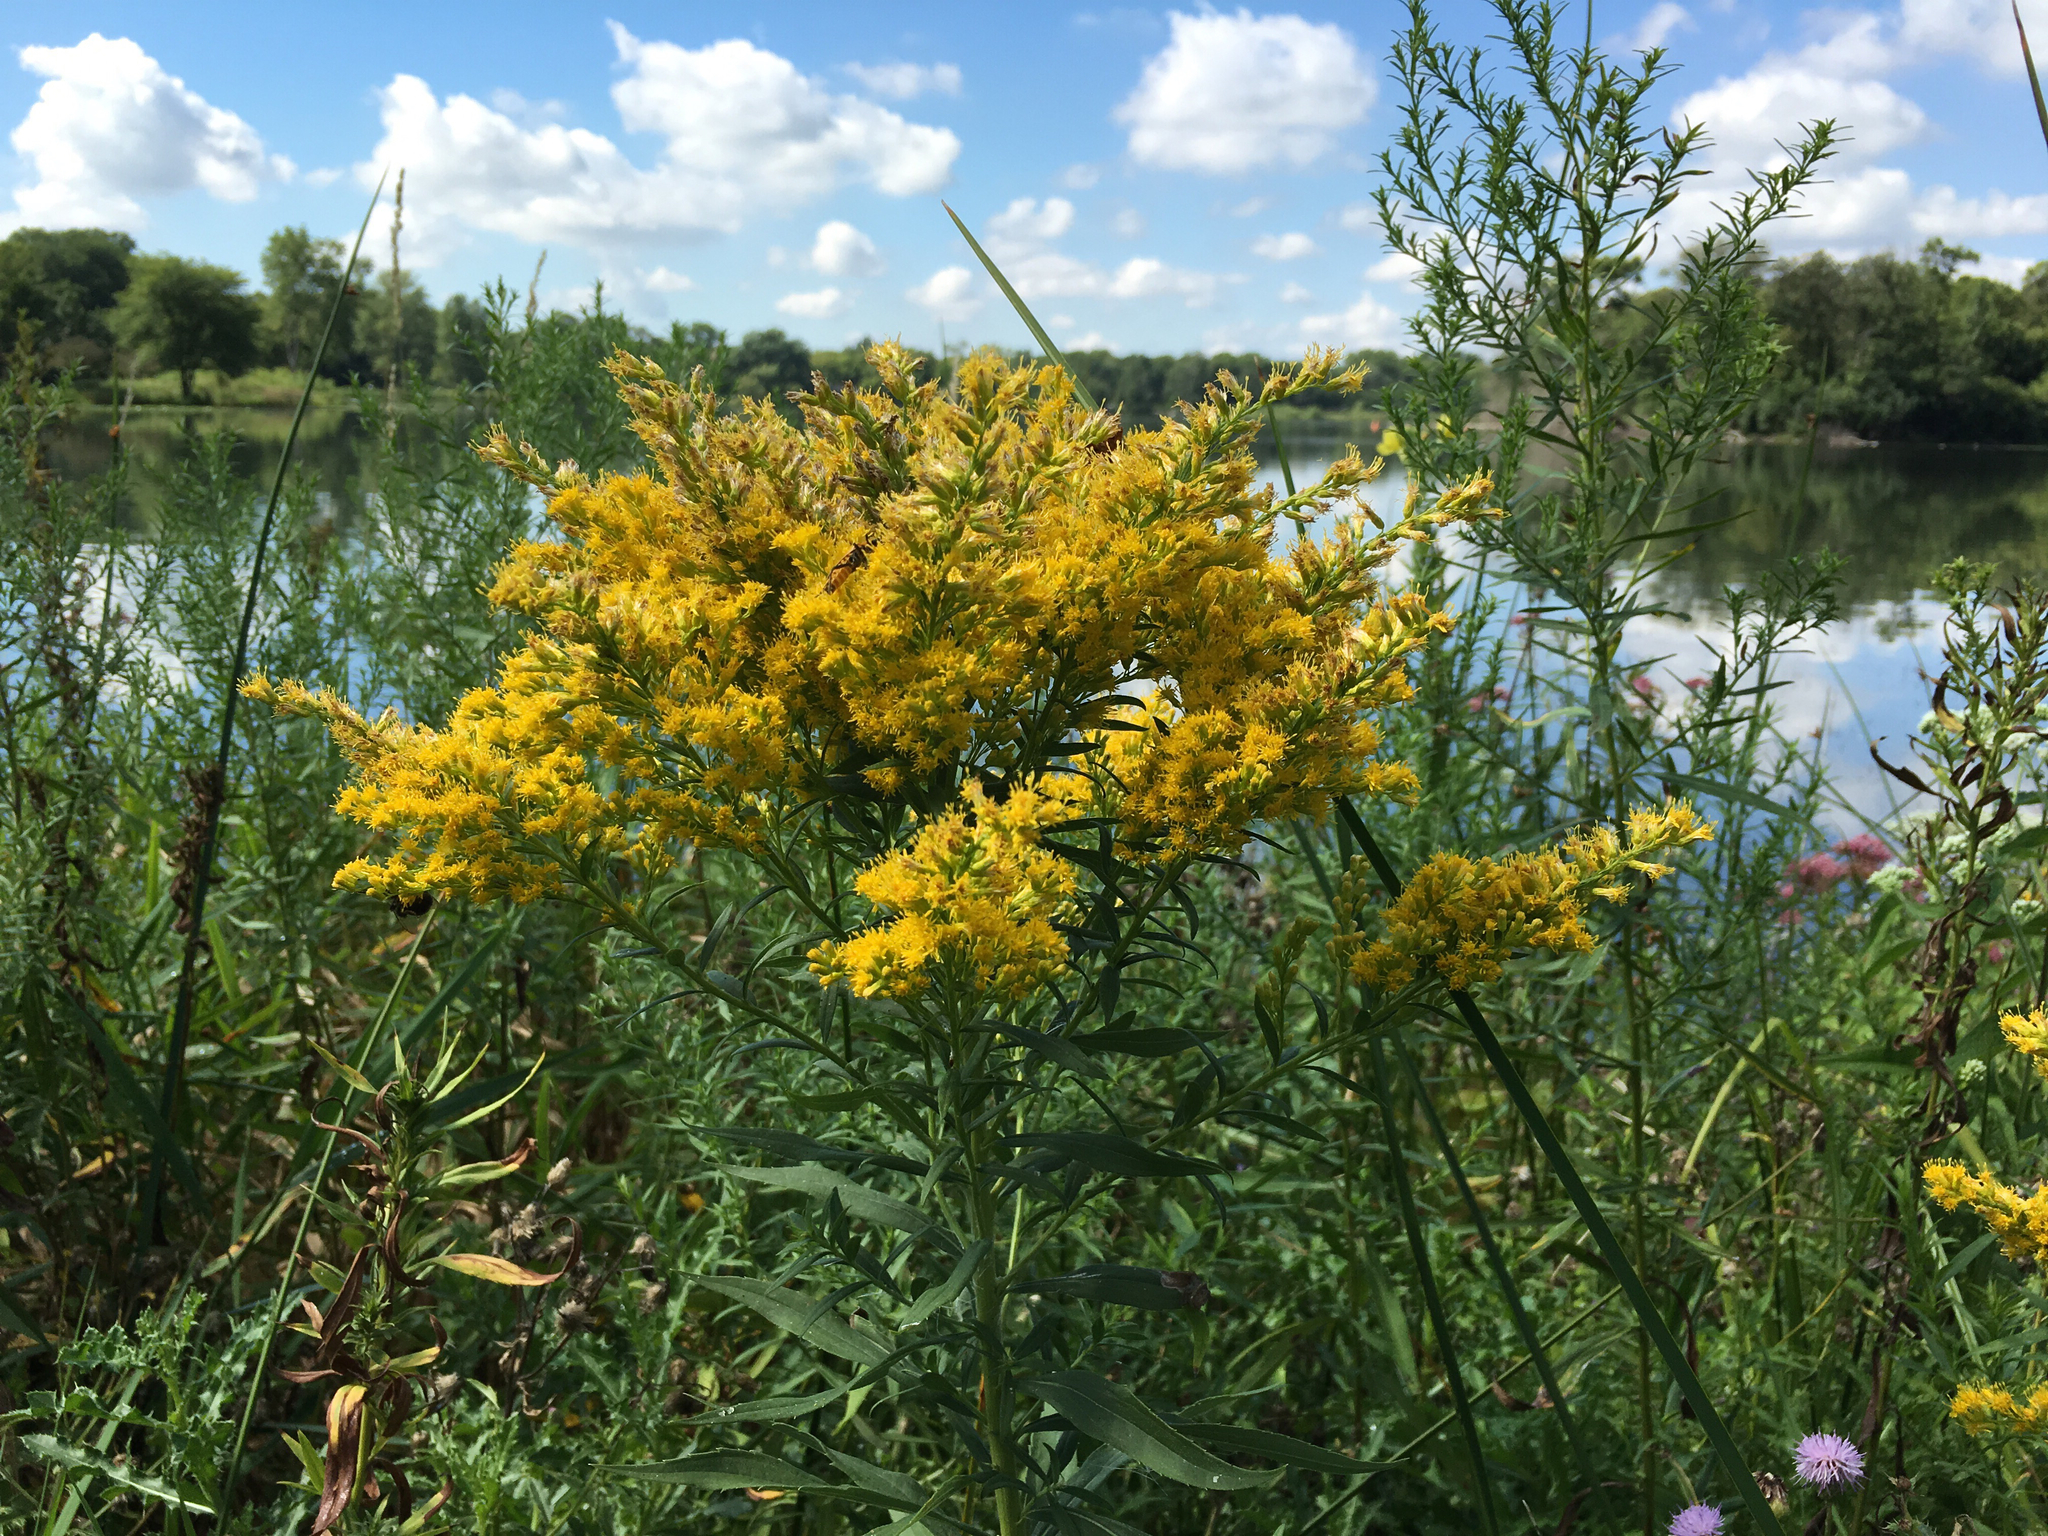 Canada goldenrod's yellow flower against a backdrop with cloudy sky and a lake.